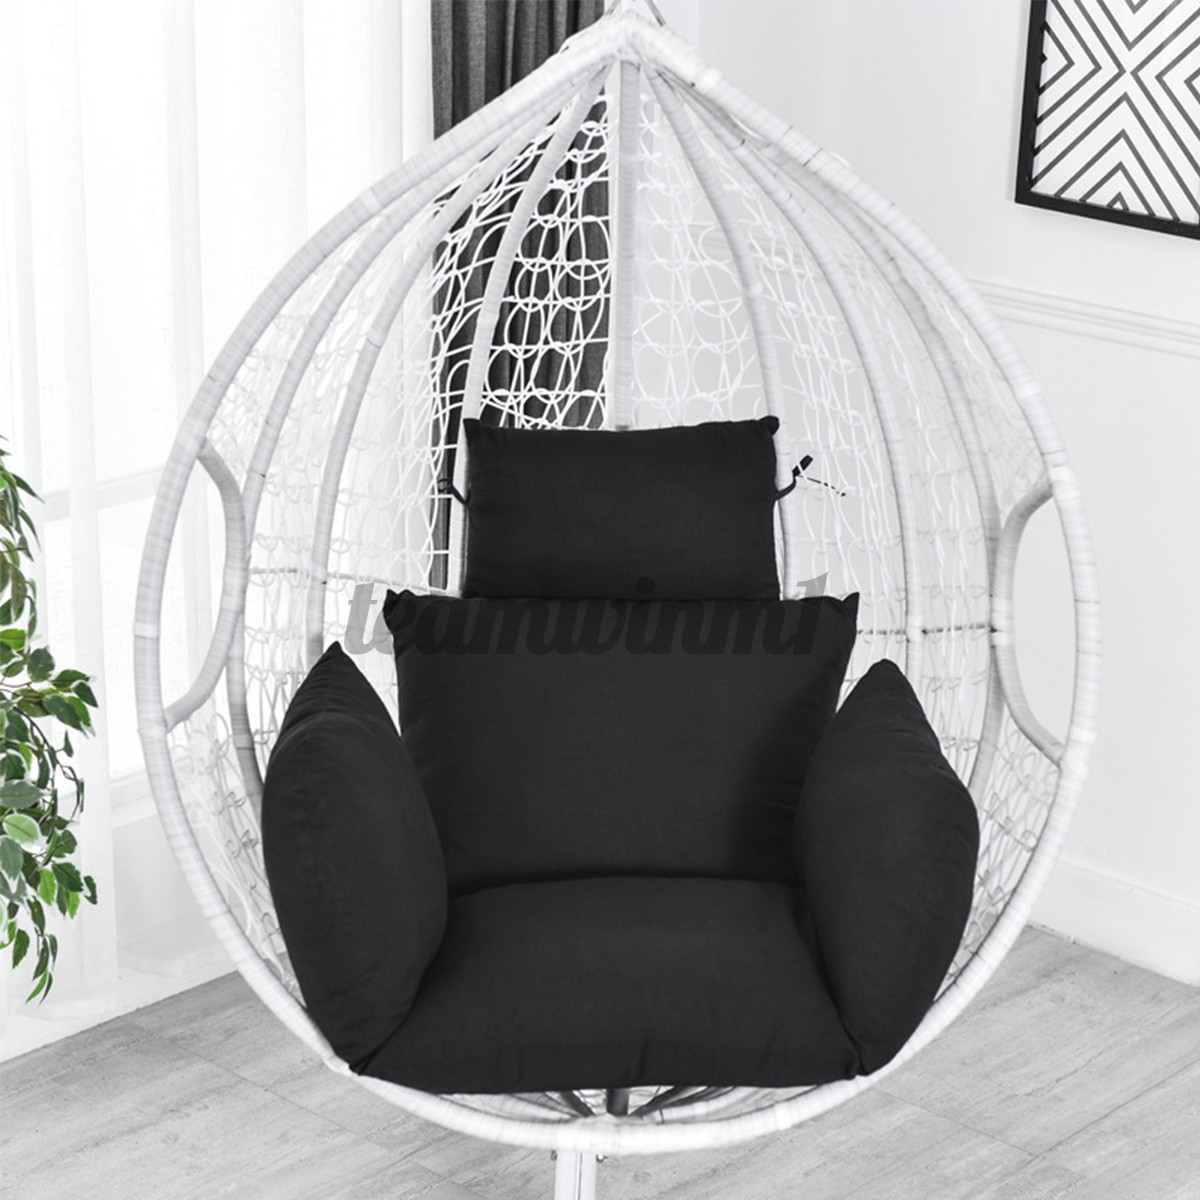 Swing Seat Pillow Chair Cushion Mat Hanging Indoor Outdoor Patio Egg Chair Pad Shopee Indonesia